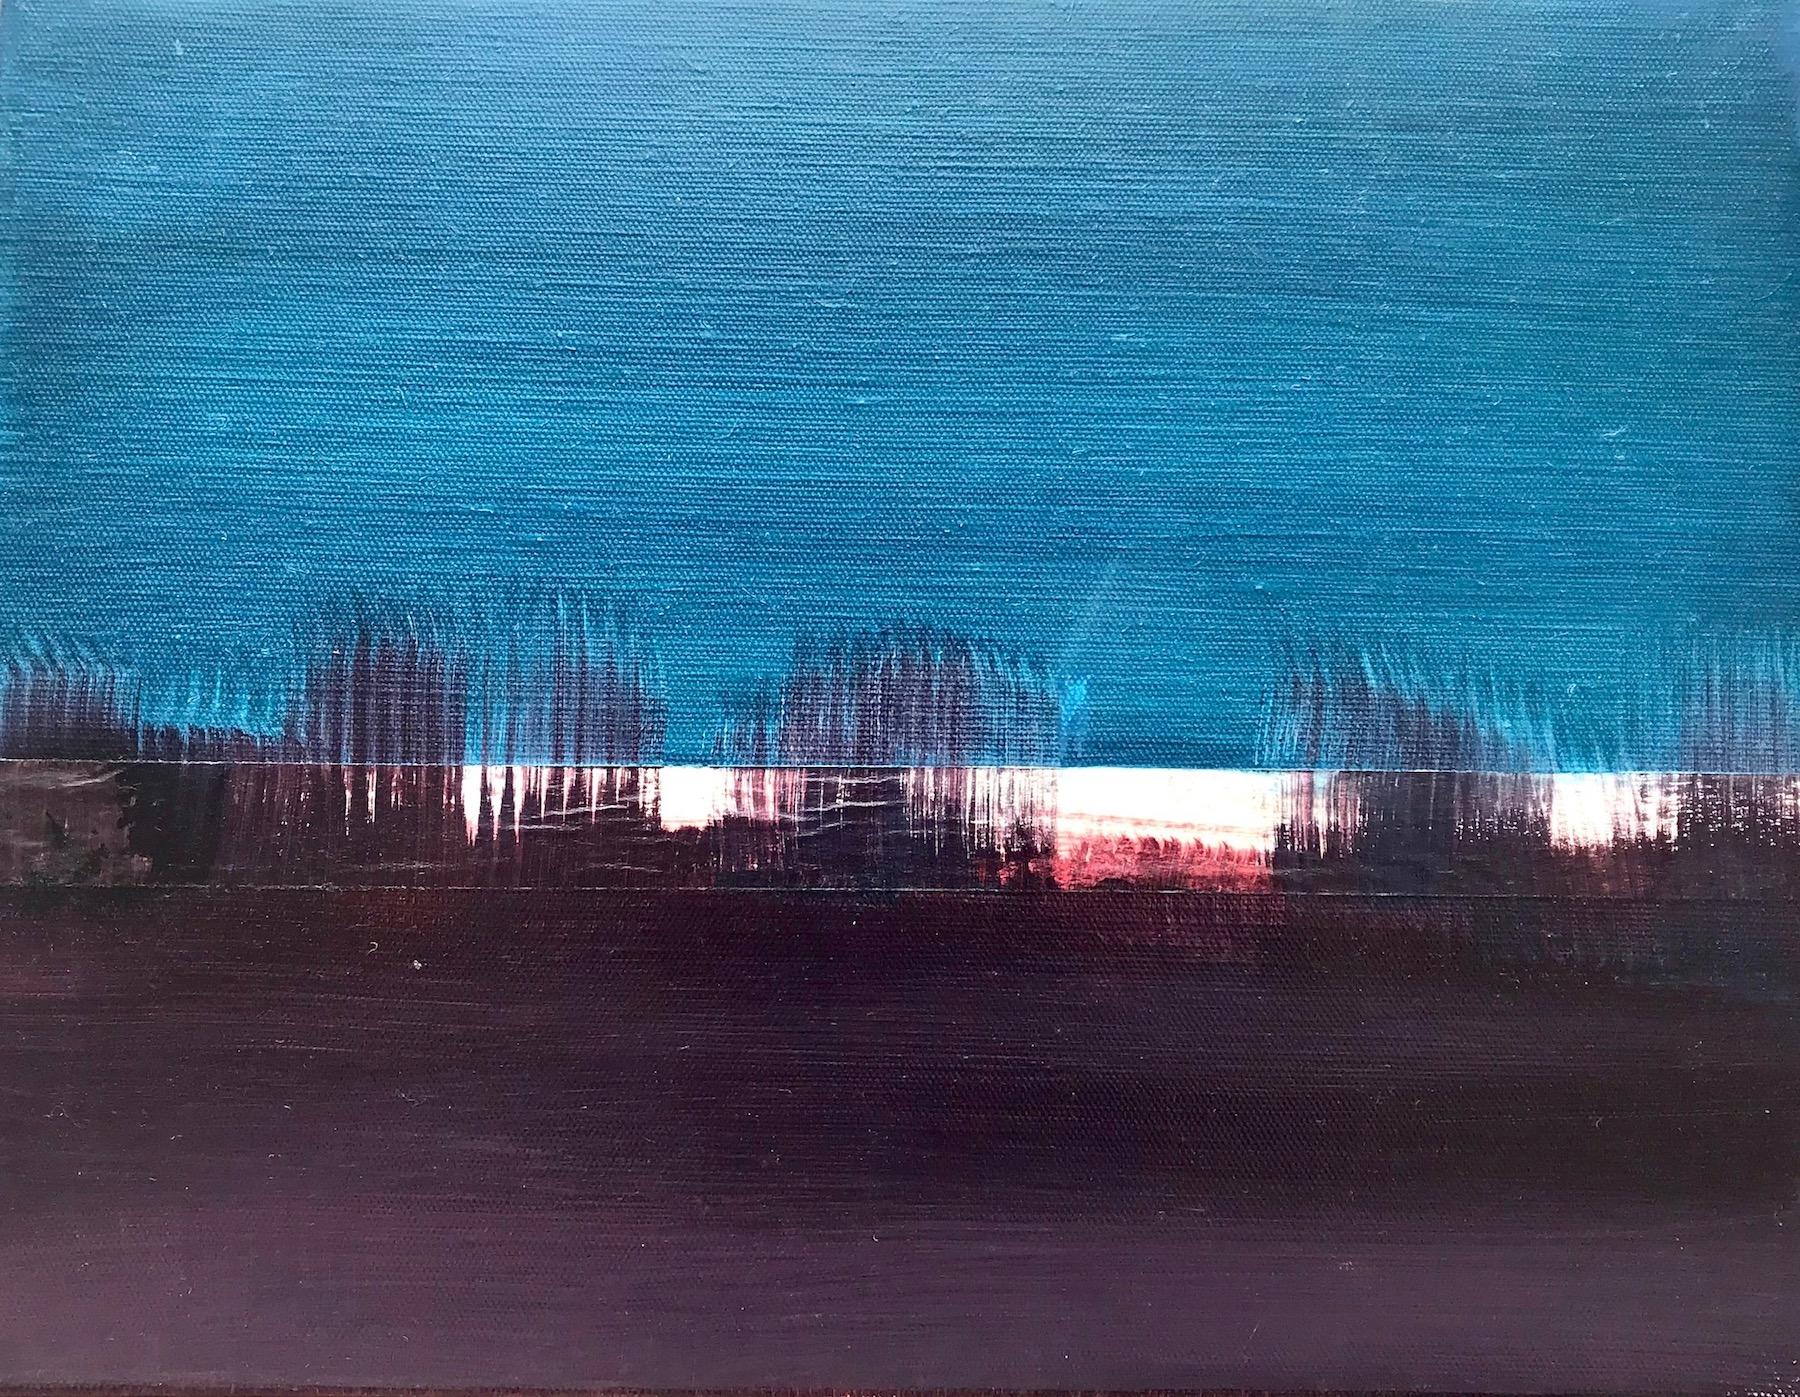 Emma Hartley
Original Landscape painting
Oil on Linen
H30 W40 D2cm
(Please note that in situ images are purely an indication of how a piece may look).
Original Landscape painting by Emma Hartley inspire by the light between night and day.

Emma